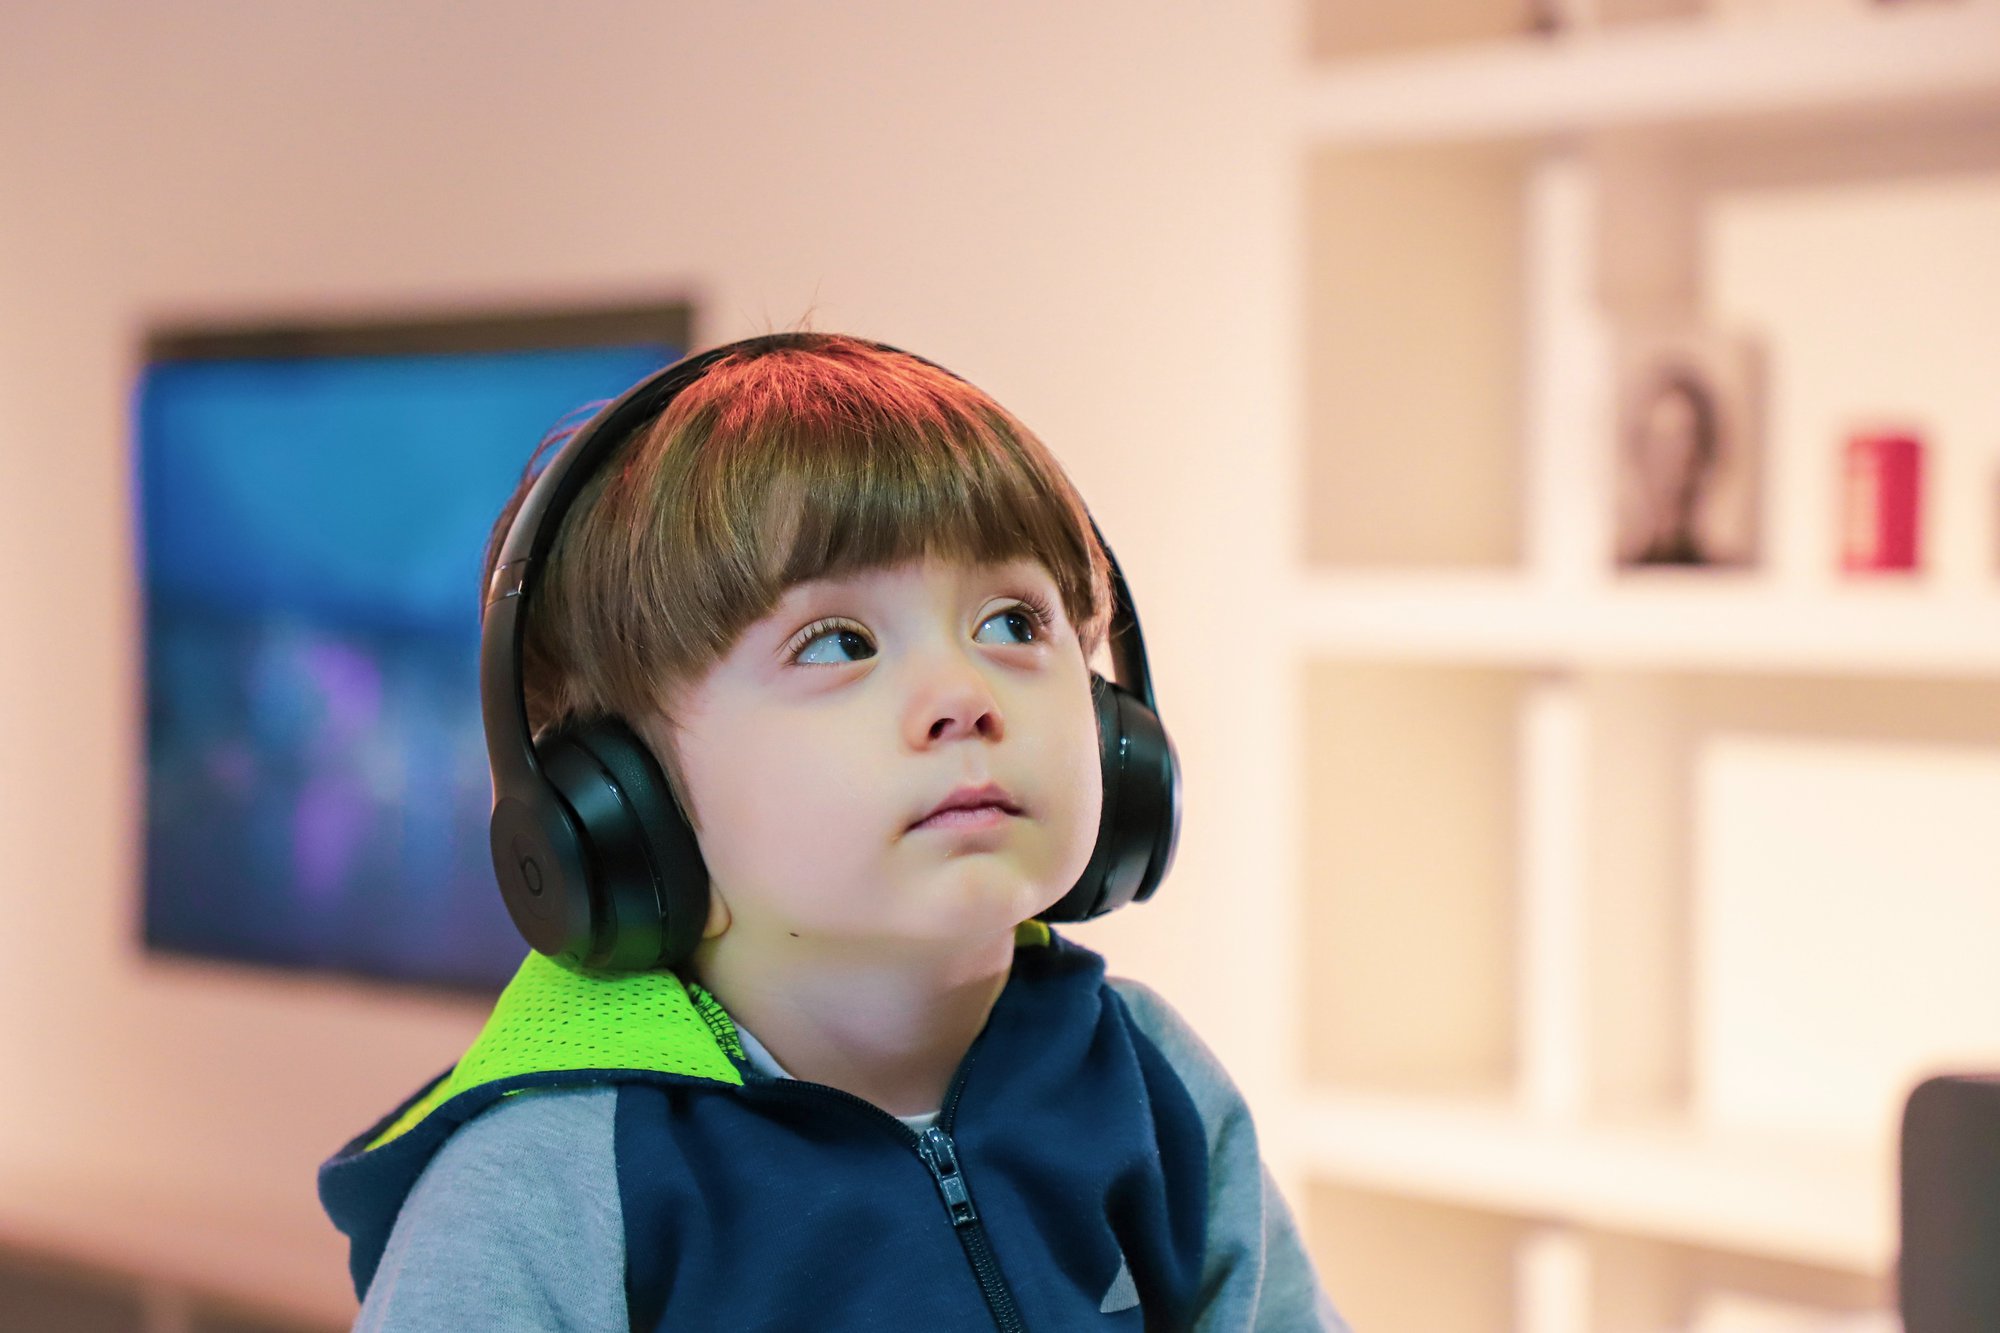 A small child wearing headphones could have one of the many types of developmental disabilities.